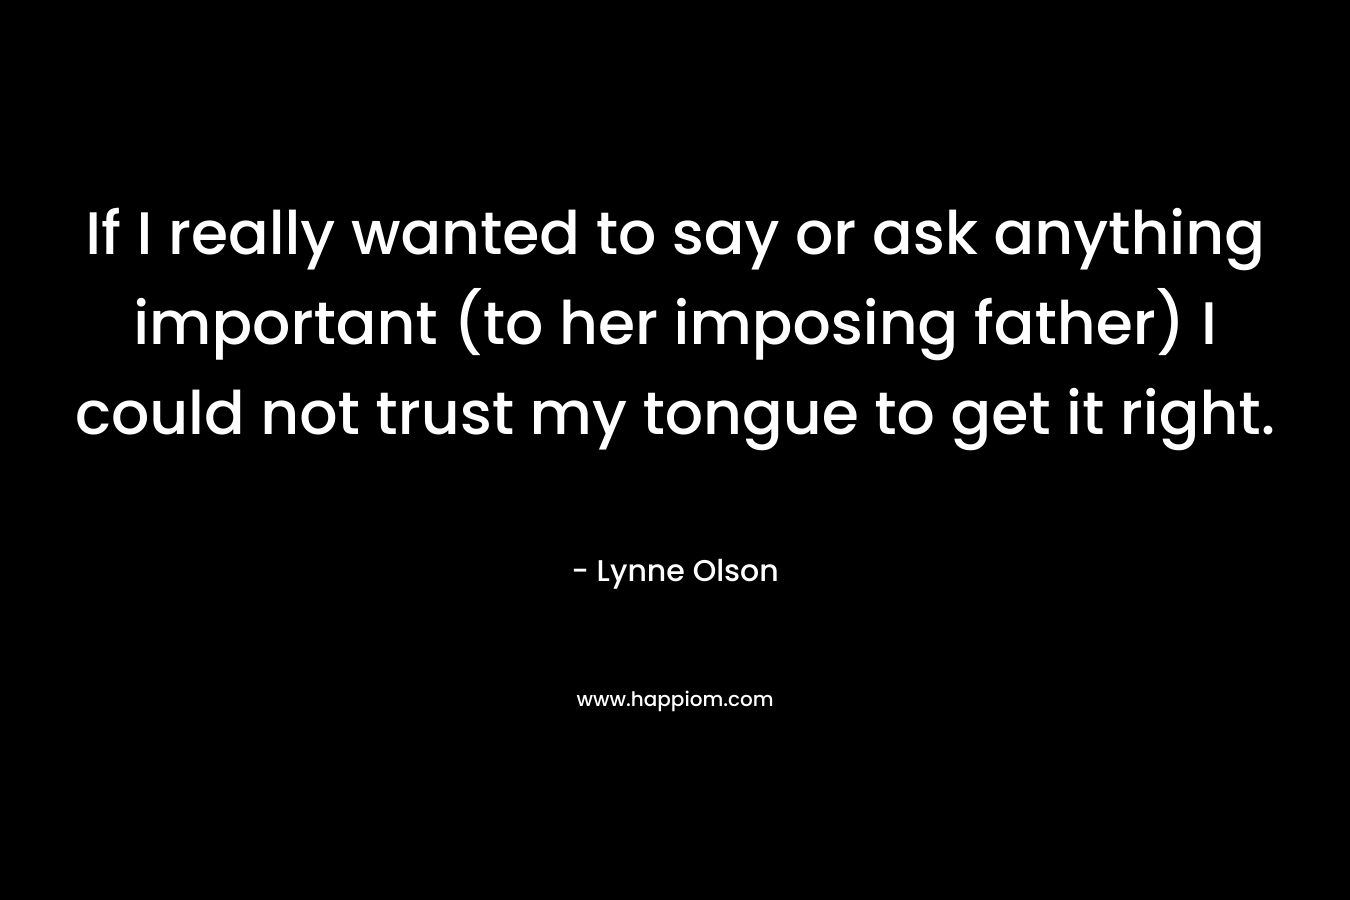 If I really wanted to say or ask anything important (to her imposing father) I could not trust my tongue to get it right.